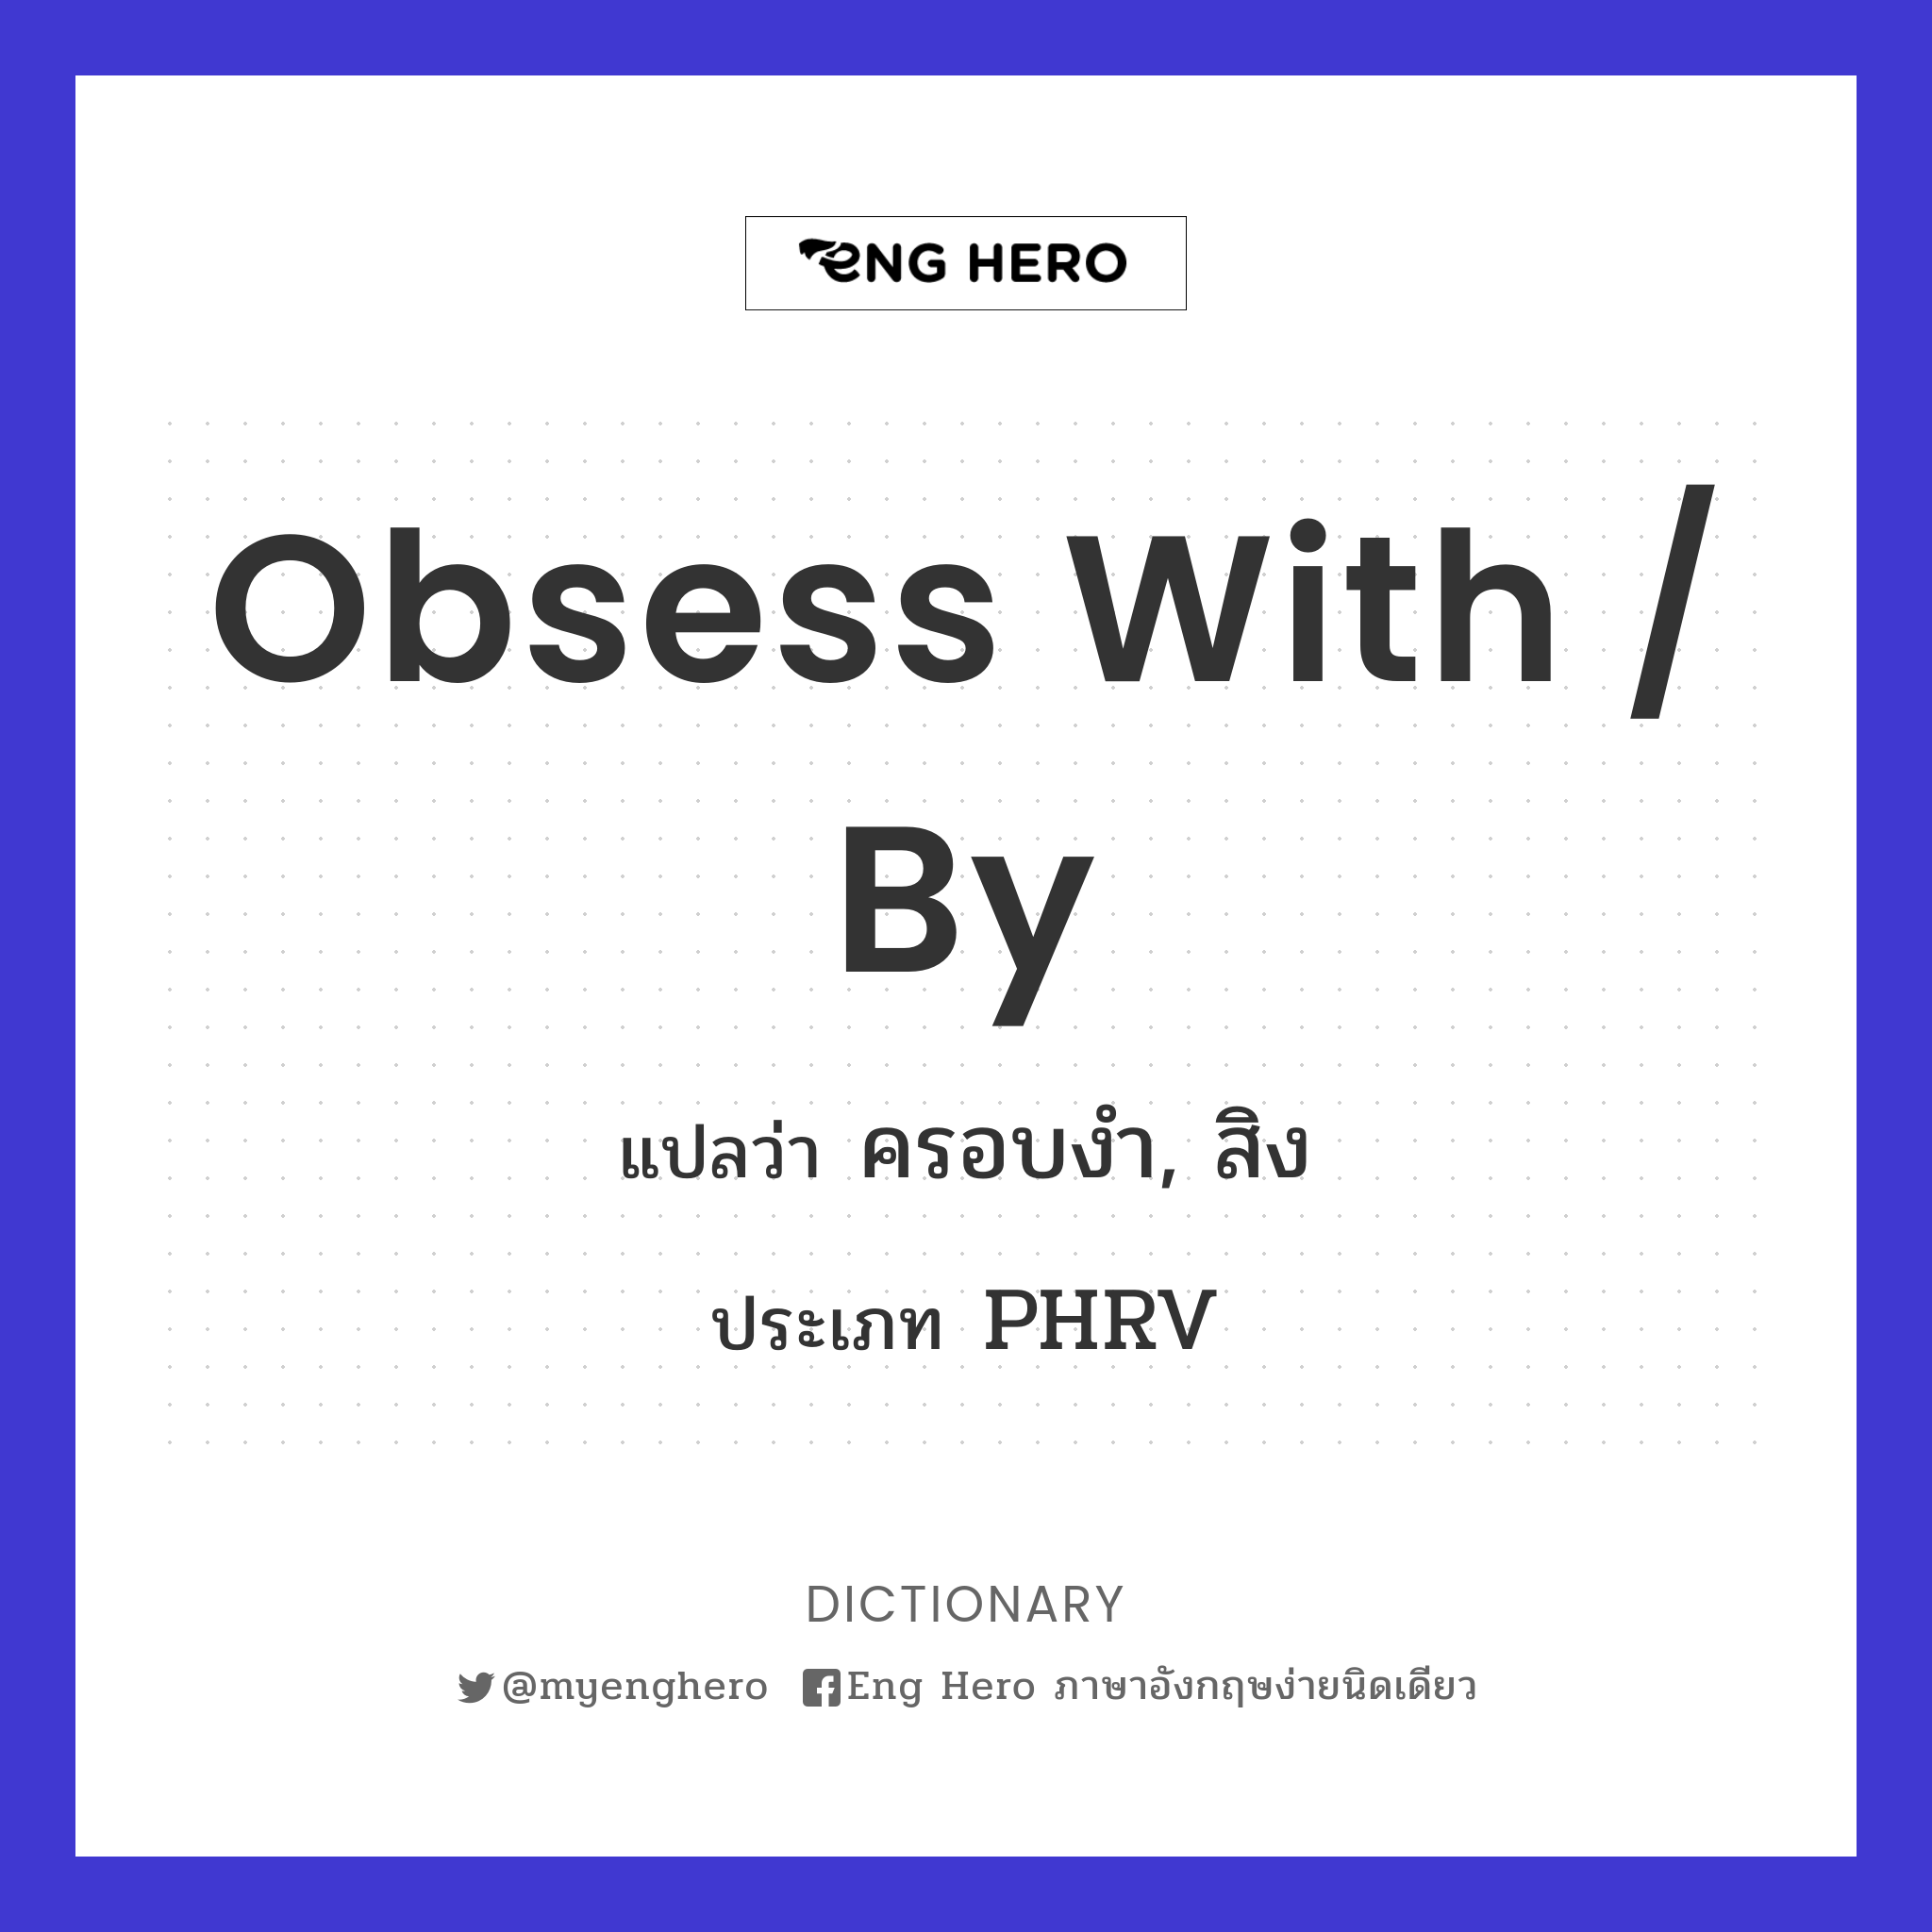 obsess with / by